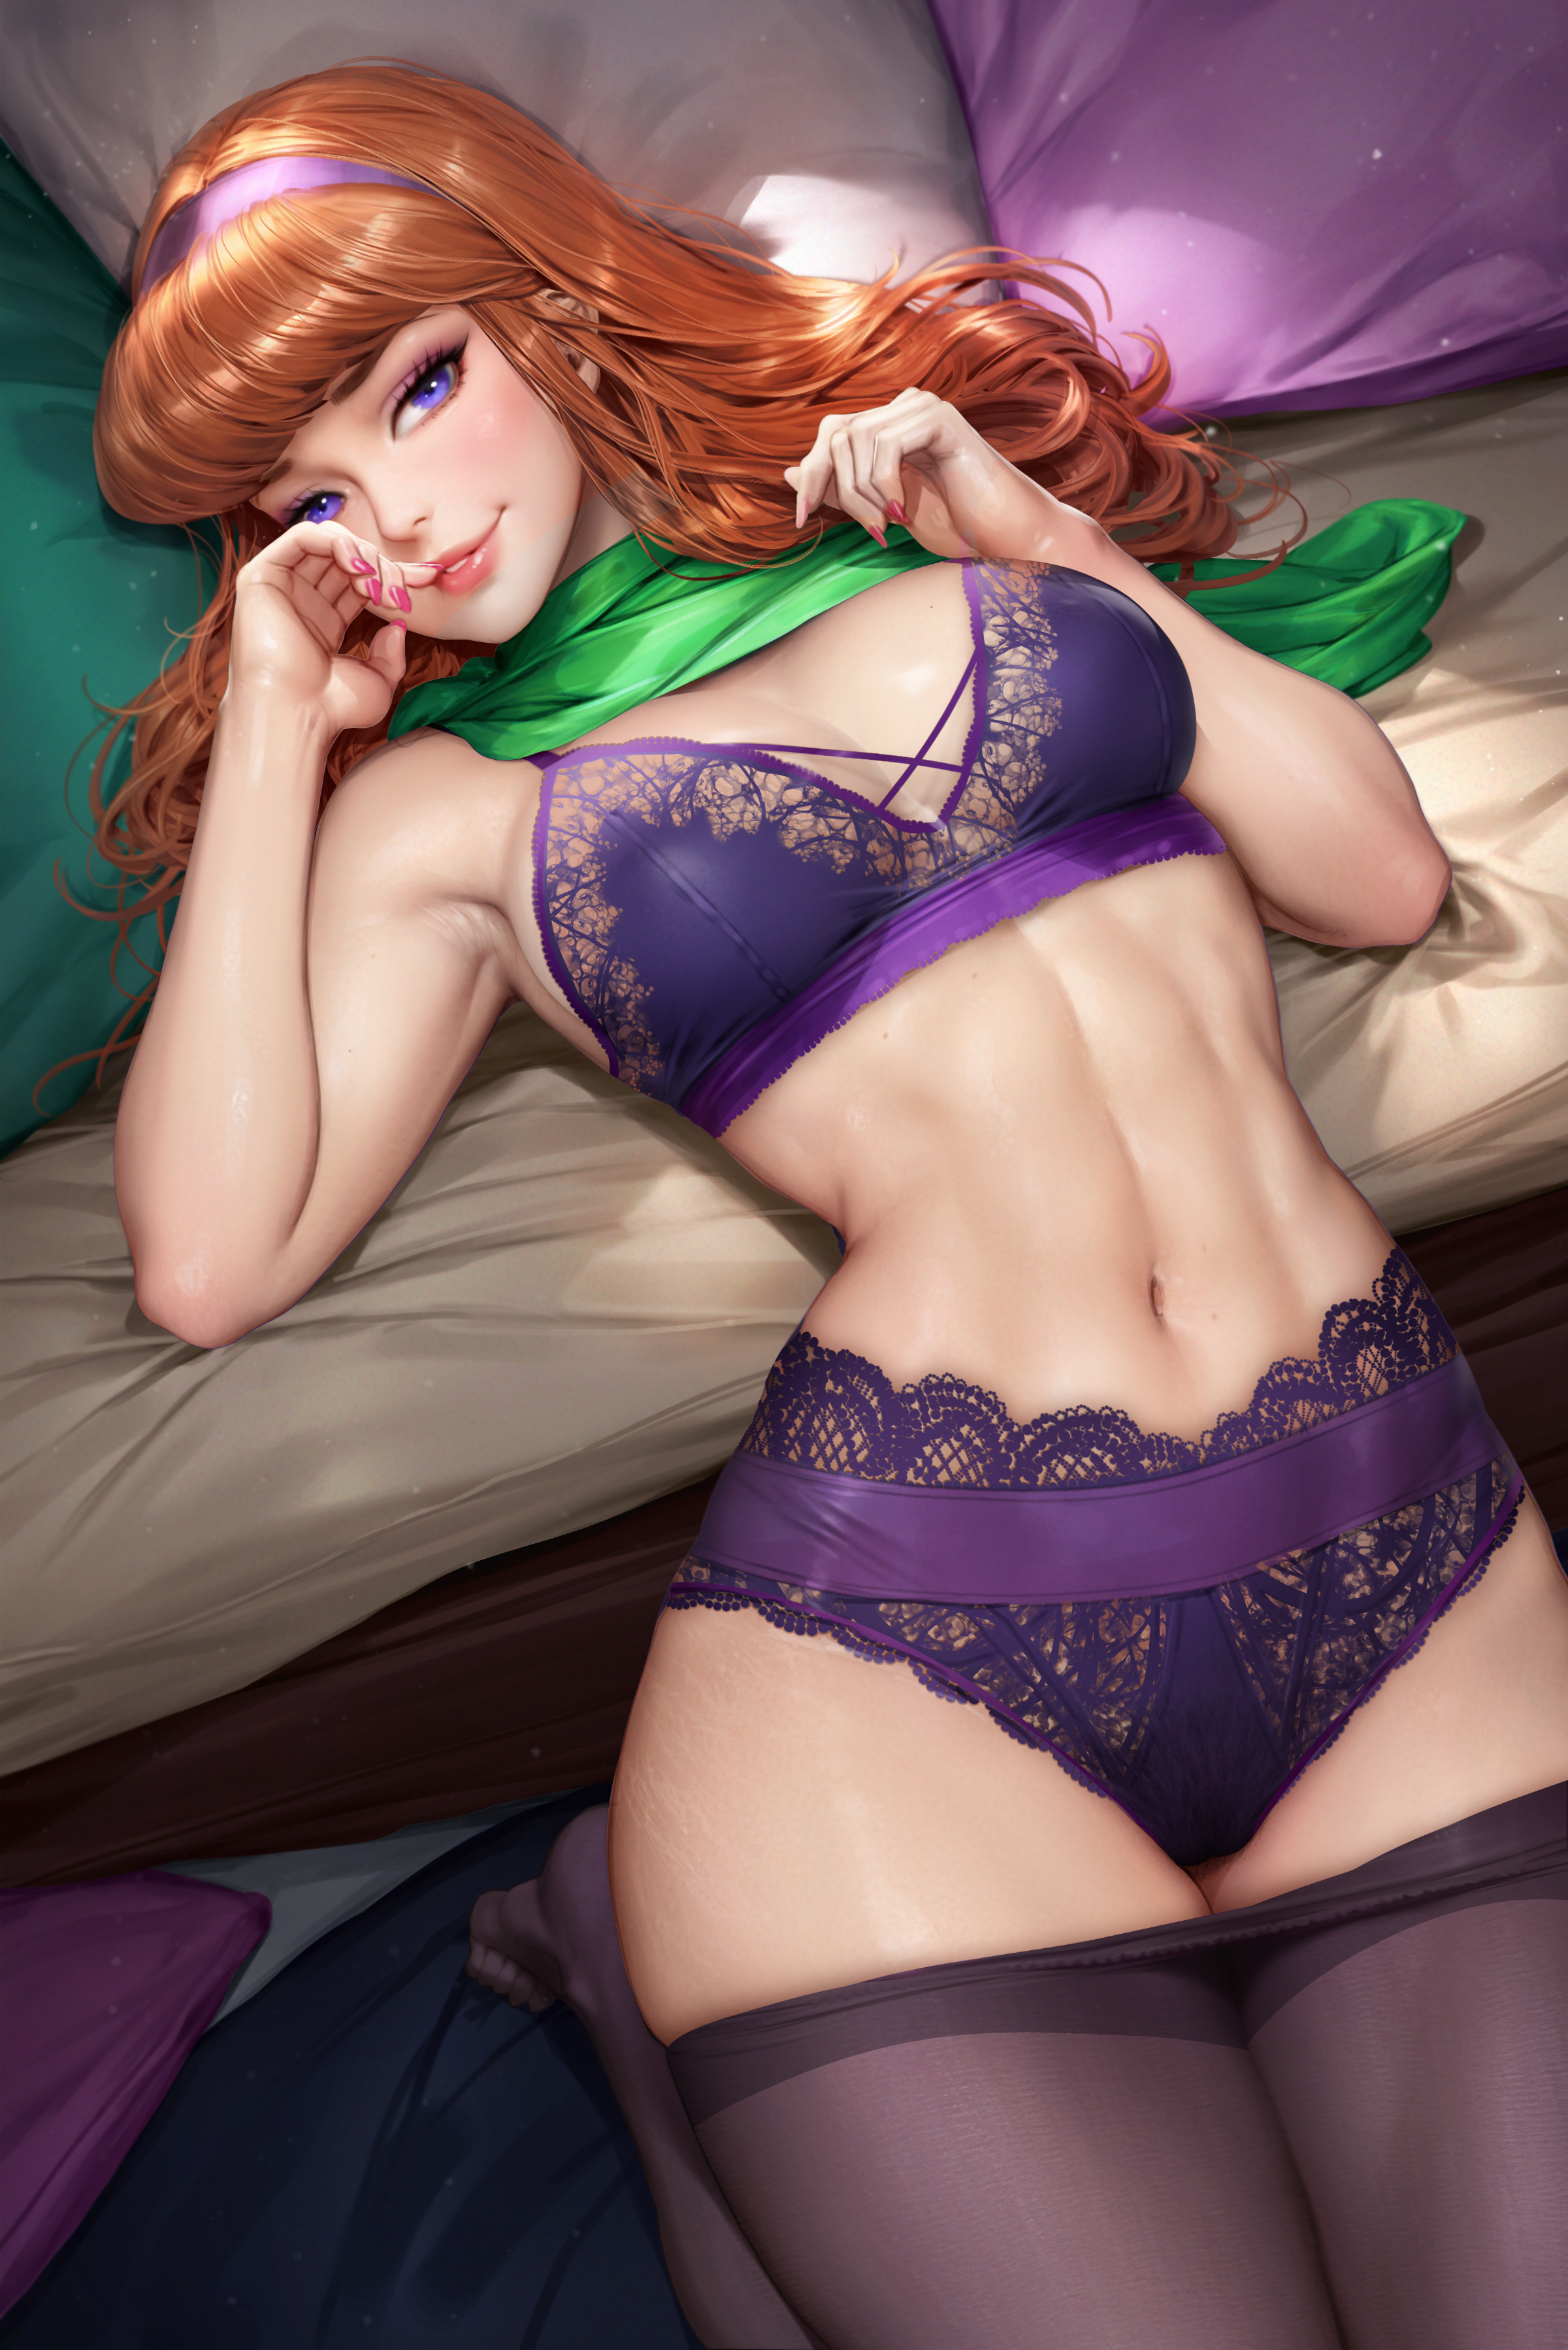 General 2400x3597 Daphne Blake Scooby-Doo fictional character redhead animated character 2D artwork drawing fan art NeoArtCorE (artist) black thigh highs kneeling bent legs high angle thighs together indoors frontal view top view parted lips long hair sensual gaze armpits belly button purple lingerie looking at viewer lingerie lying down lying on back big boobs